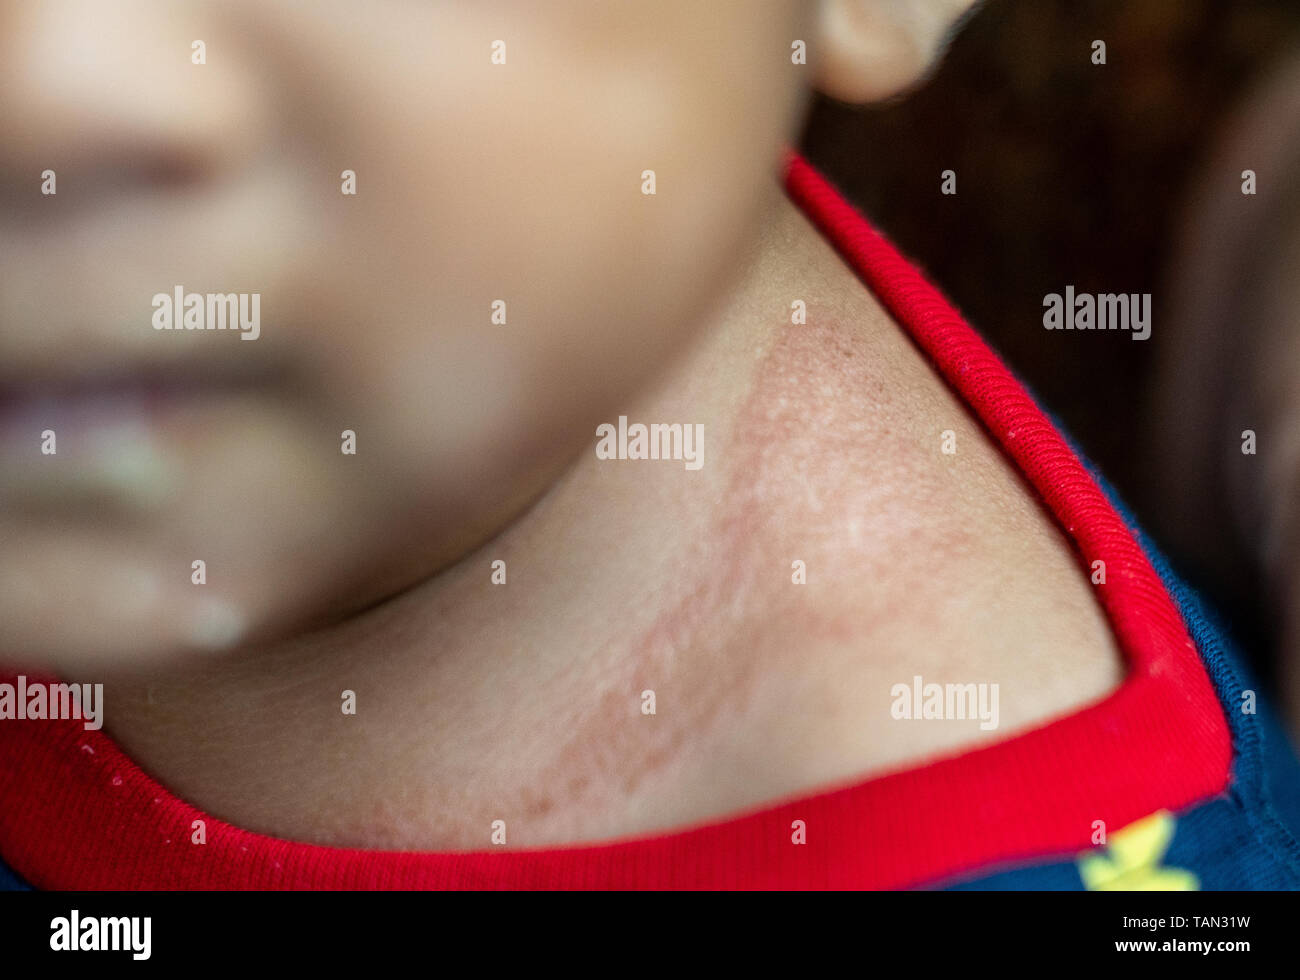 Eczema can show up as red, crusty patches on your baby's skin, often during their first few months. It’s common and very treatable. Many infants outgr Stock Photo